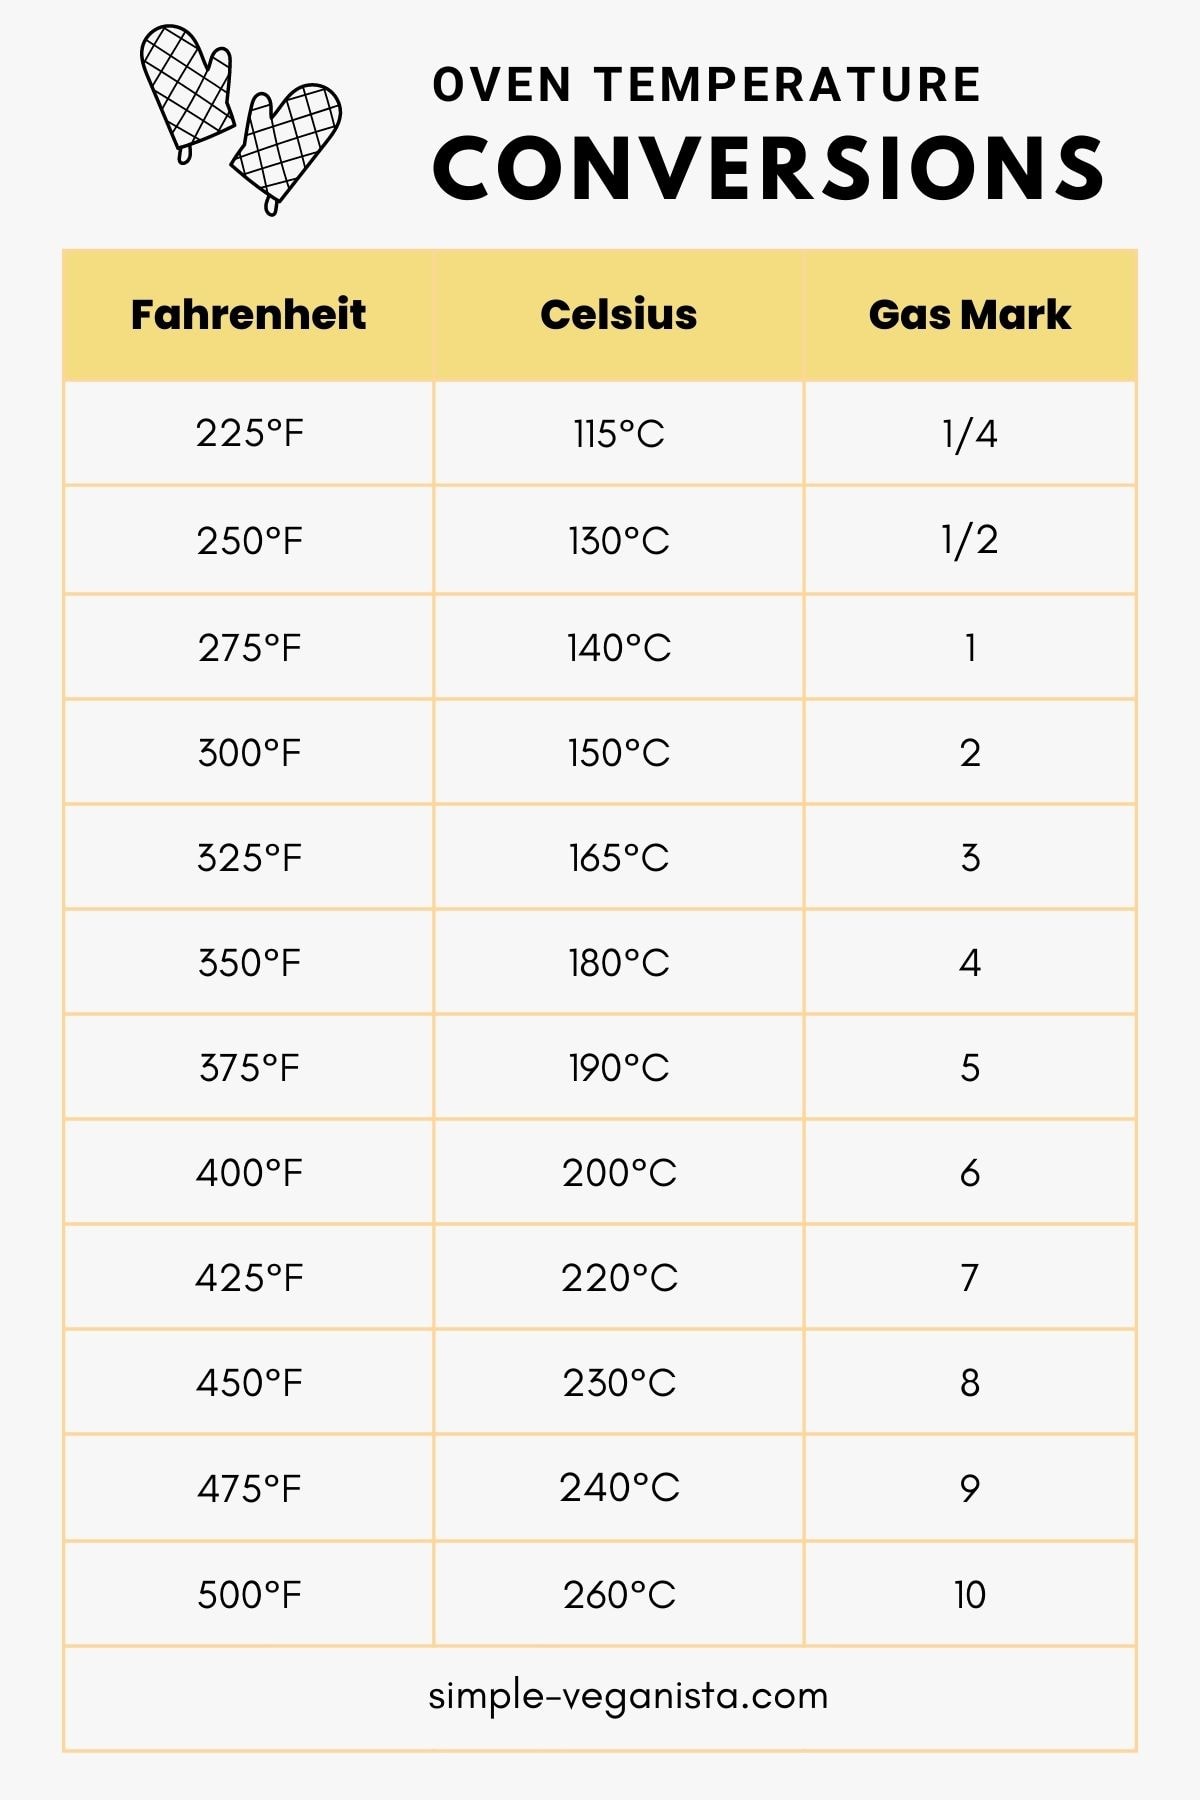 celsius-to-fahrenheit-oven-conversion-chart-the-simple-veganista